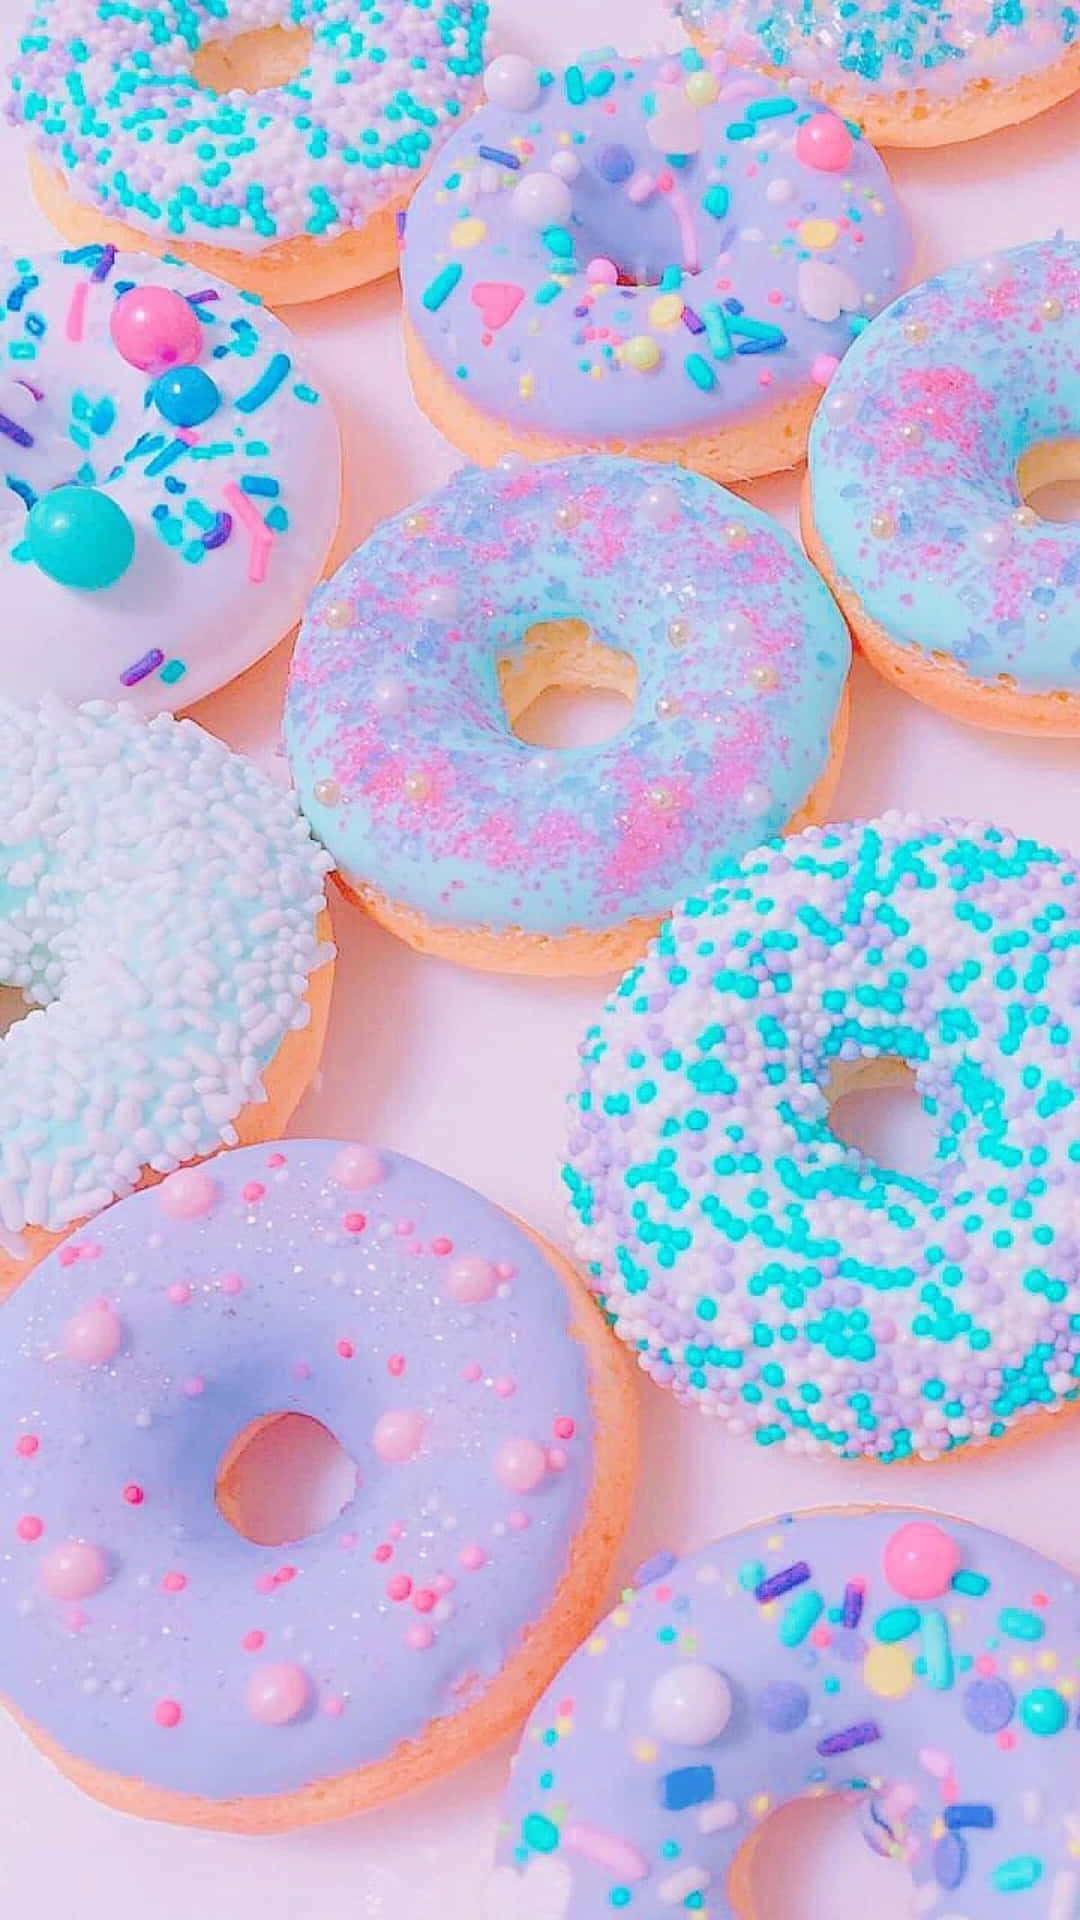 A Bunch Of Donuts Wallpaper